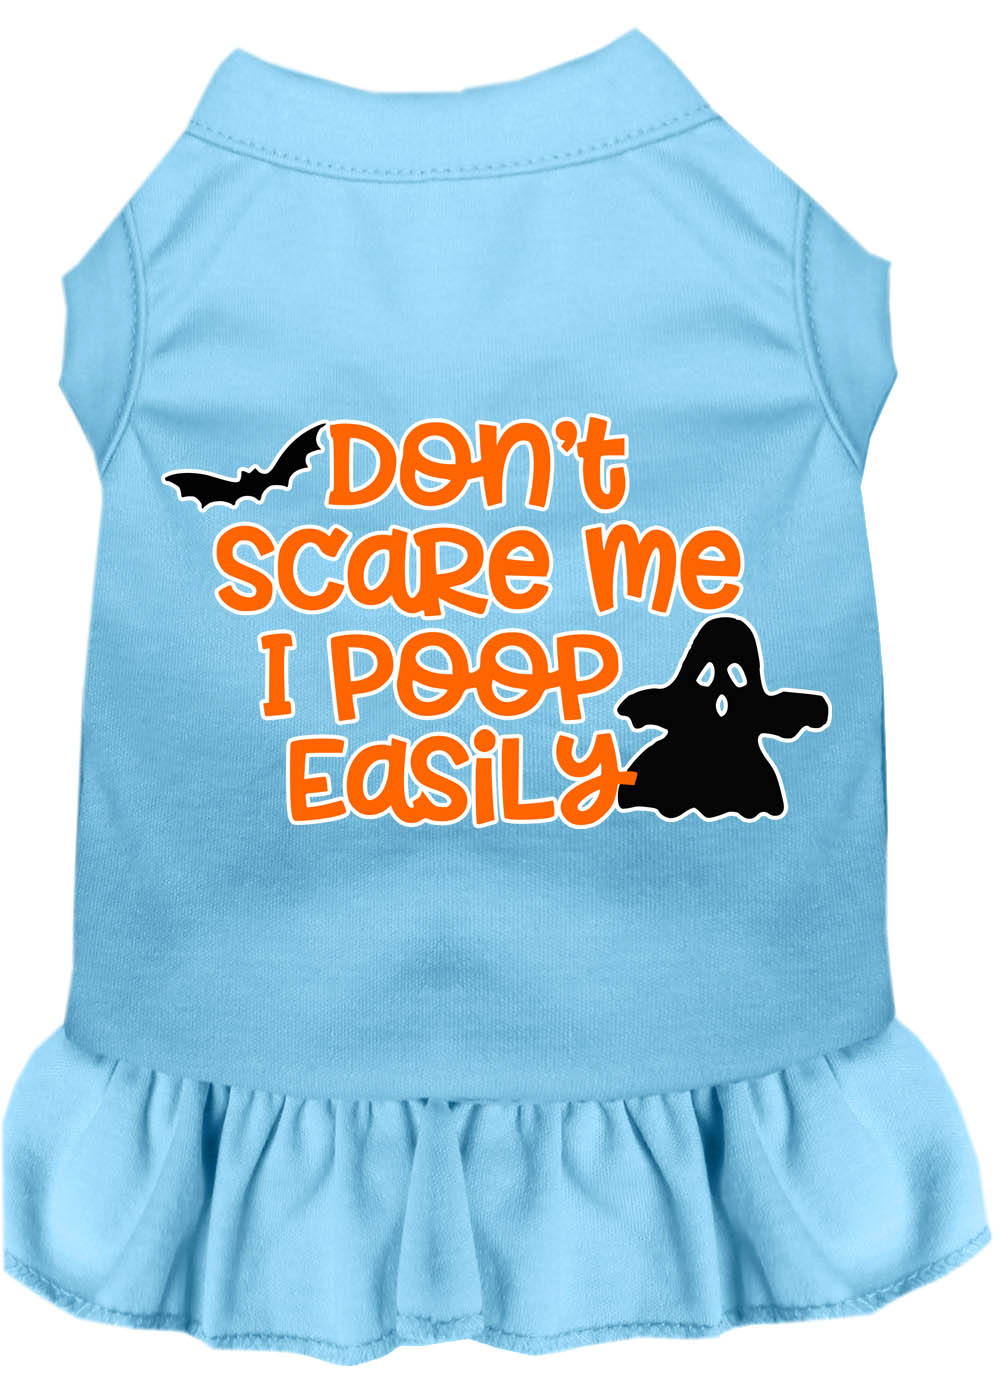 Don't Scare Me, Poops Easily Screen Print Dog Dress Baby Blue XXL